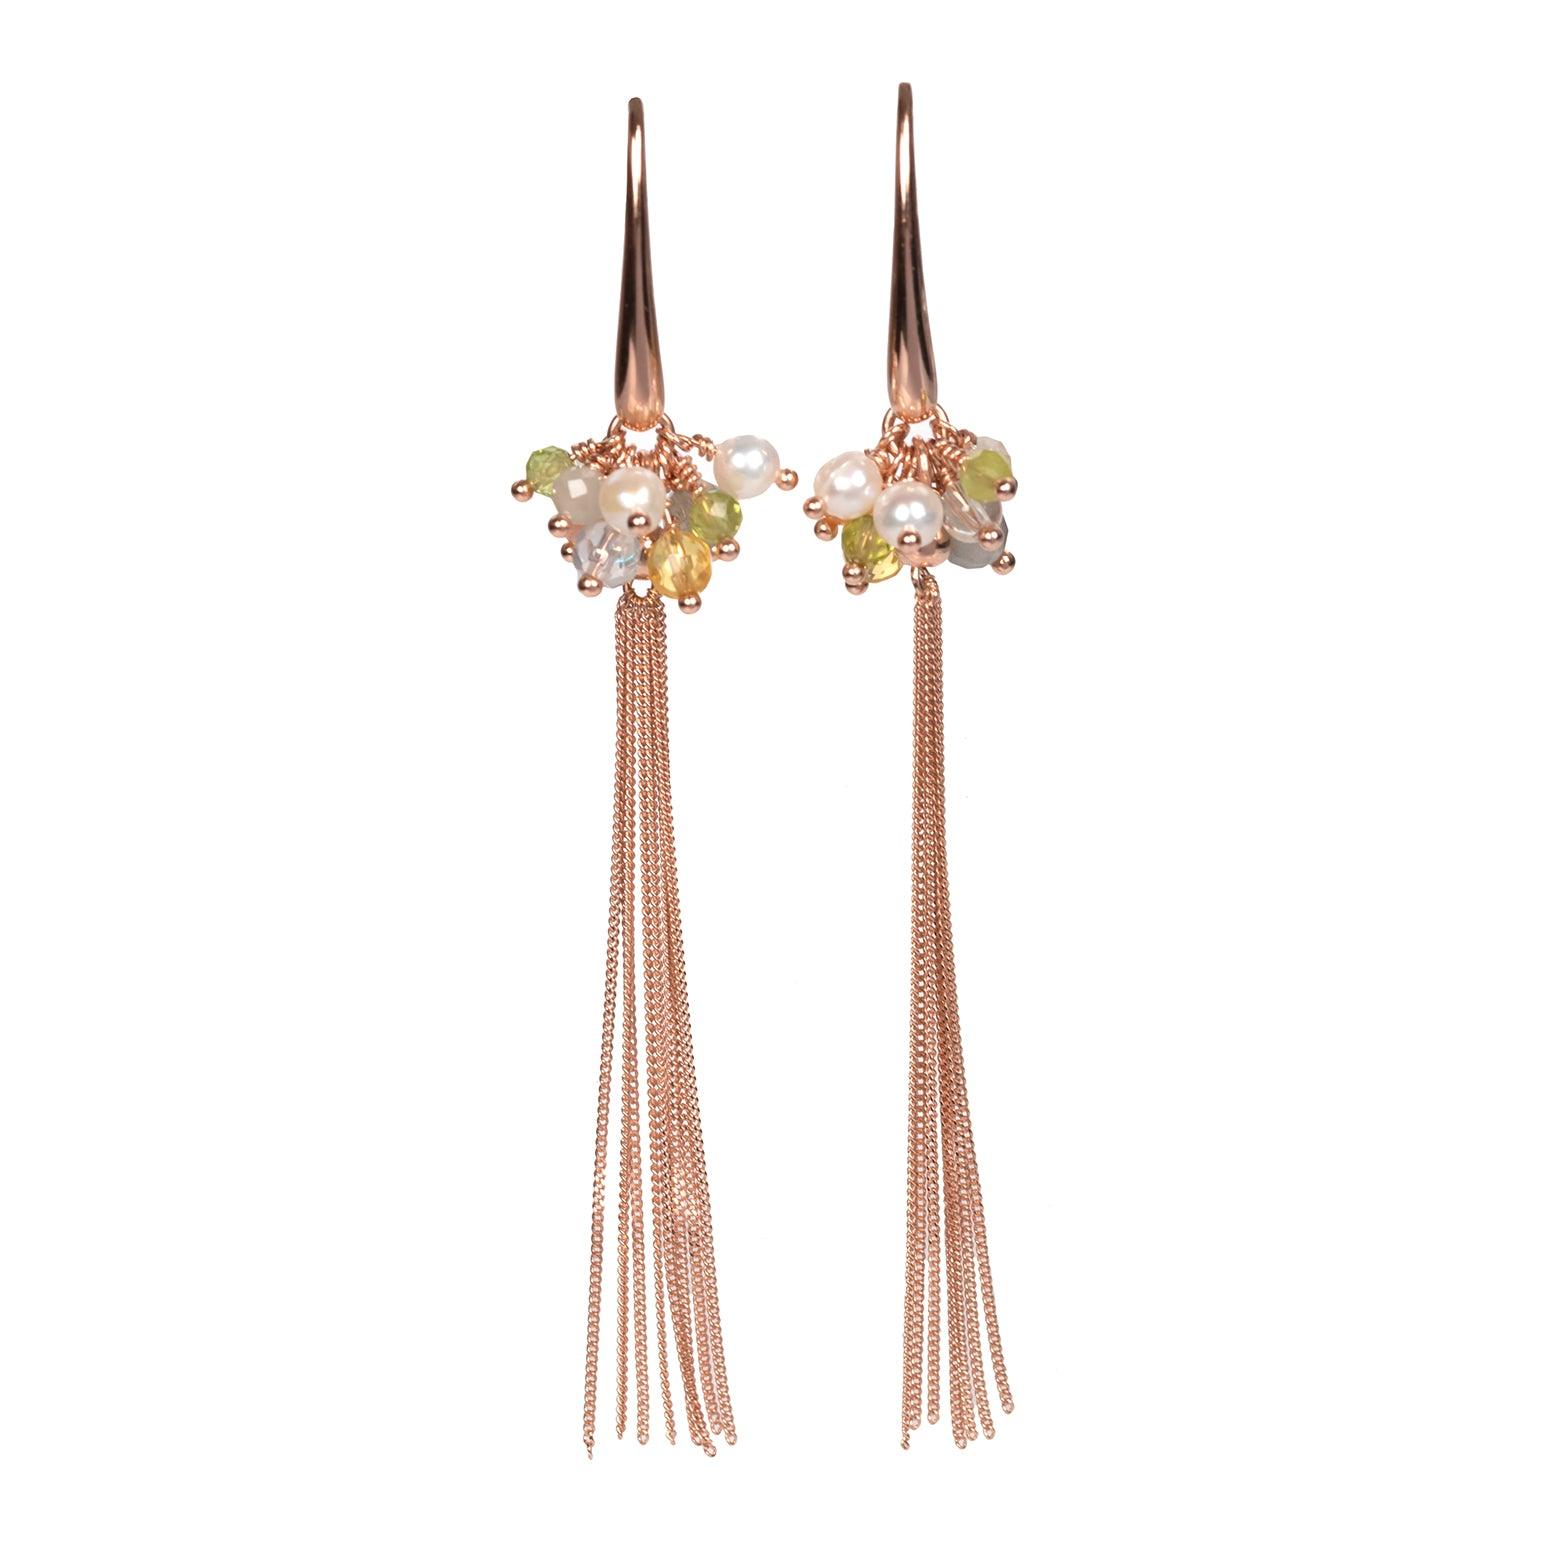 Cherie Color Tassel Earrings - Rose Gold and Silver - RUUD Studios